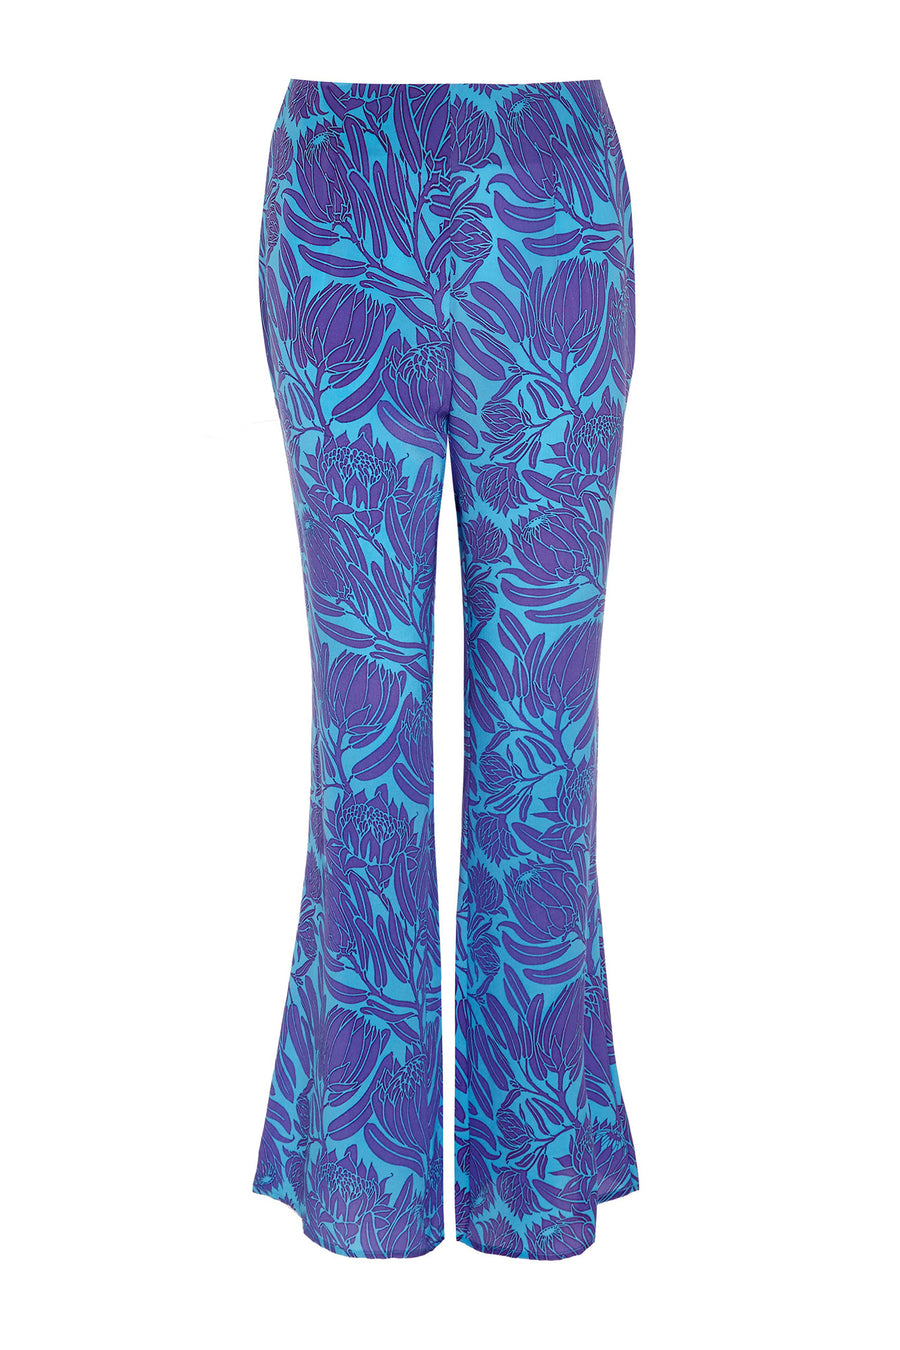 Luxury resort fashion fit & flare silk trousers in Protea violet & turquoise print by designer Lotty B